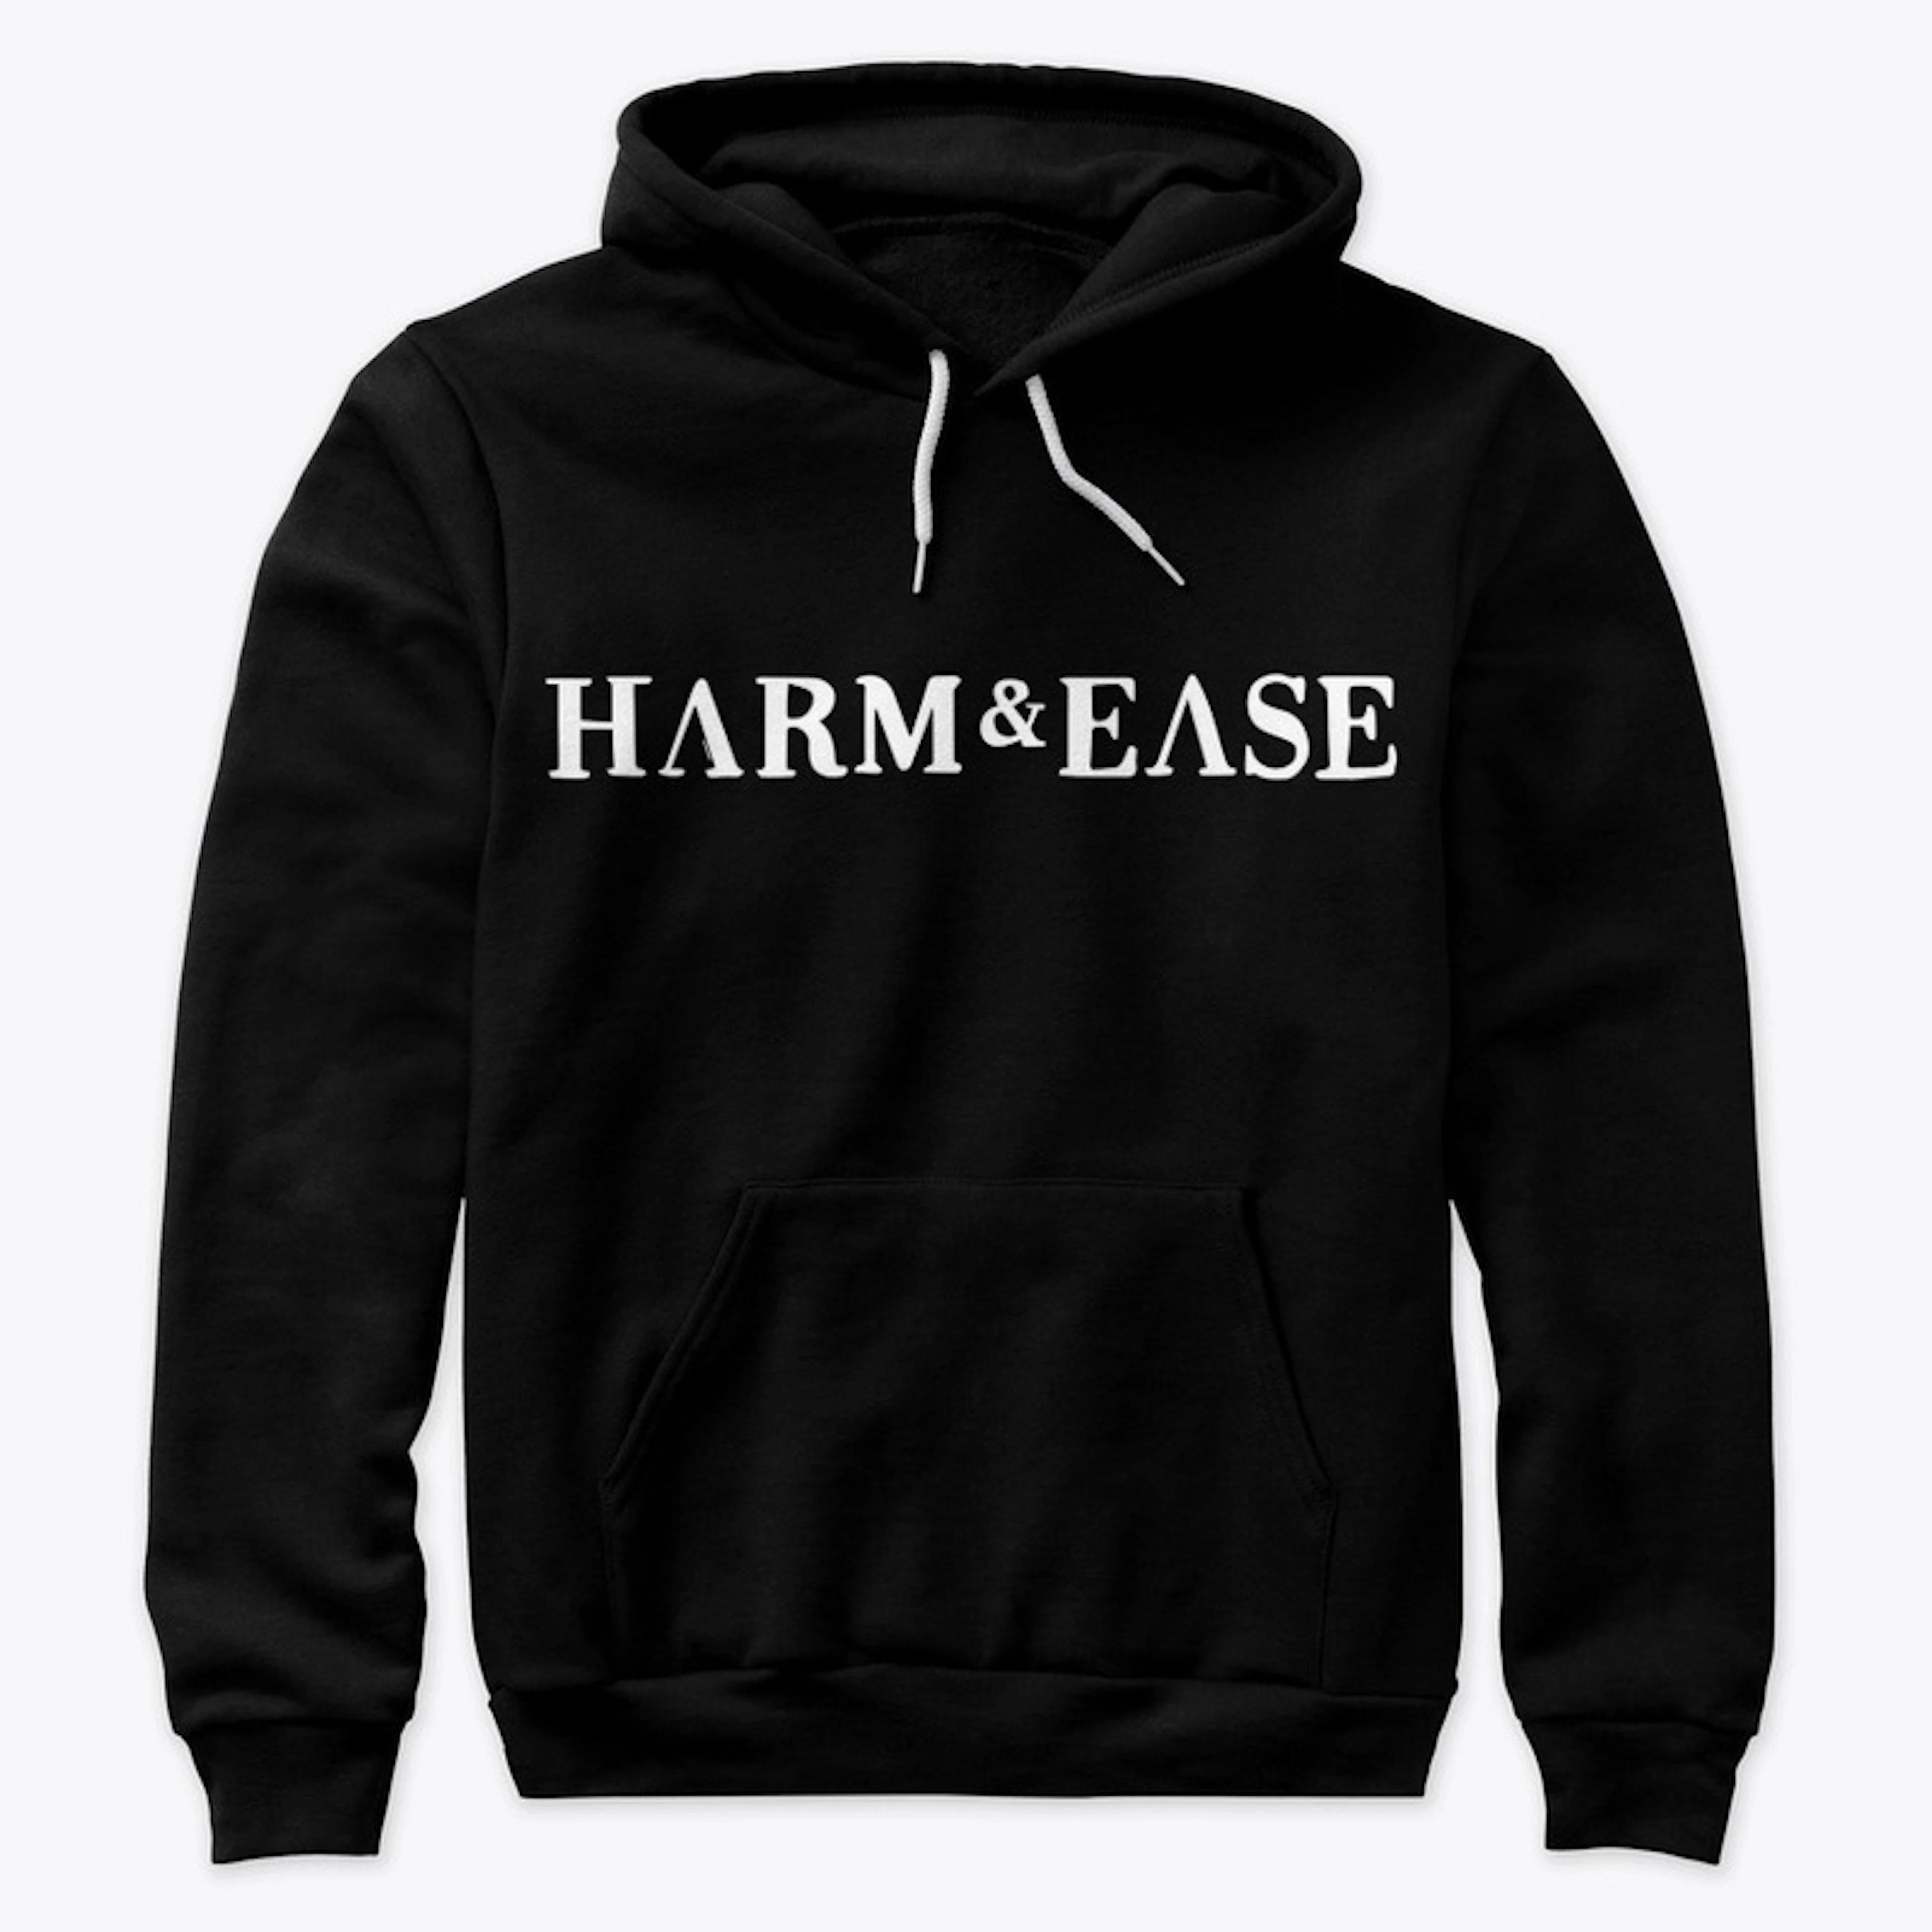 Harm And Ease Merch!